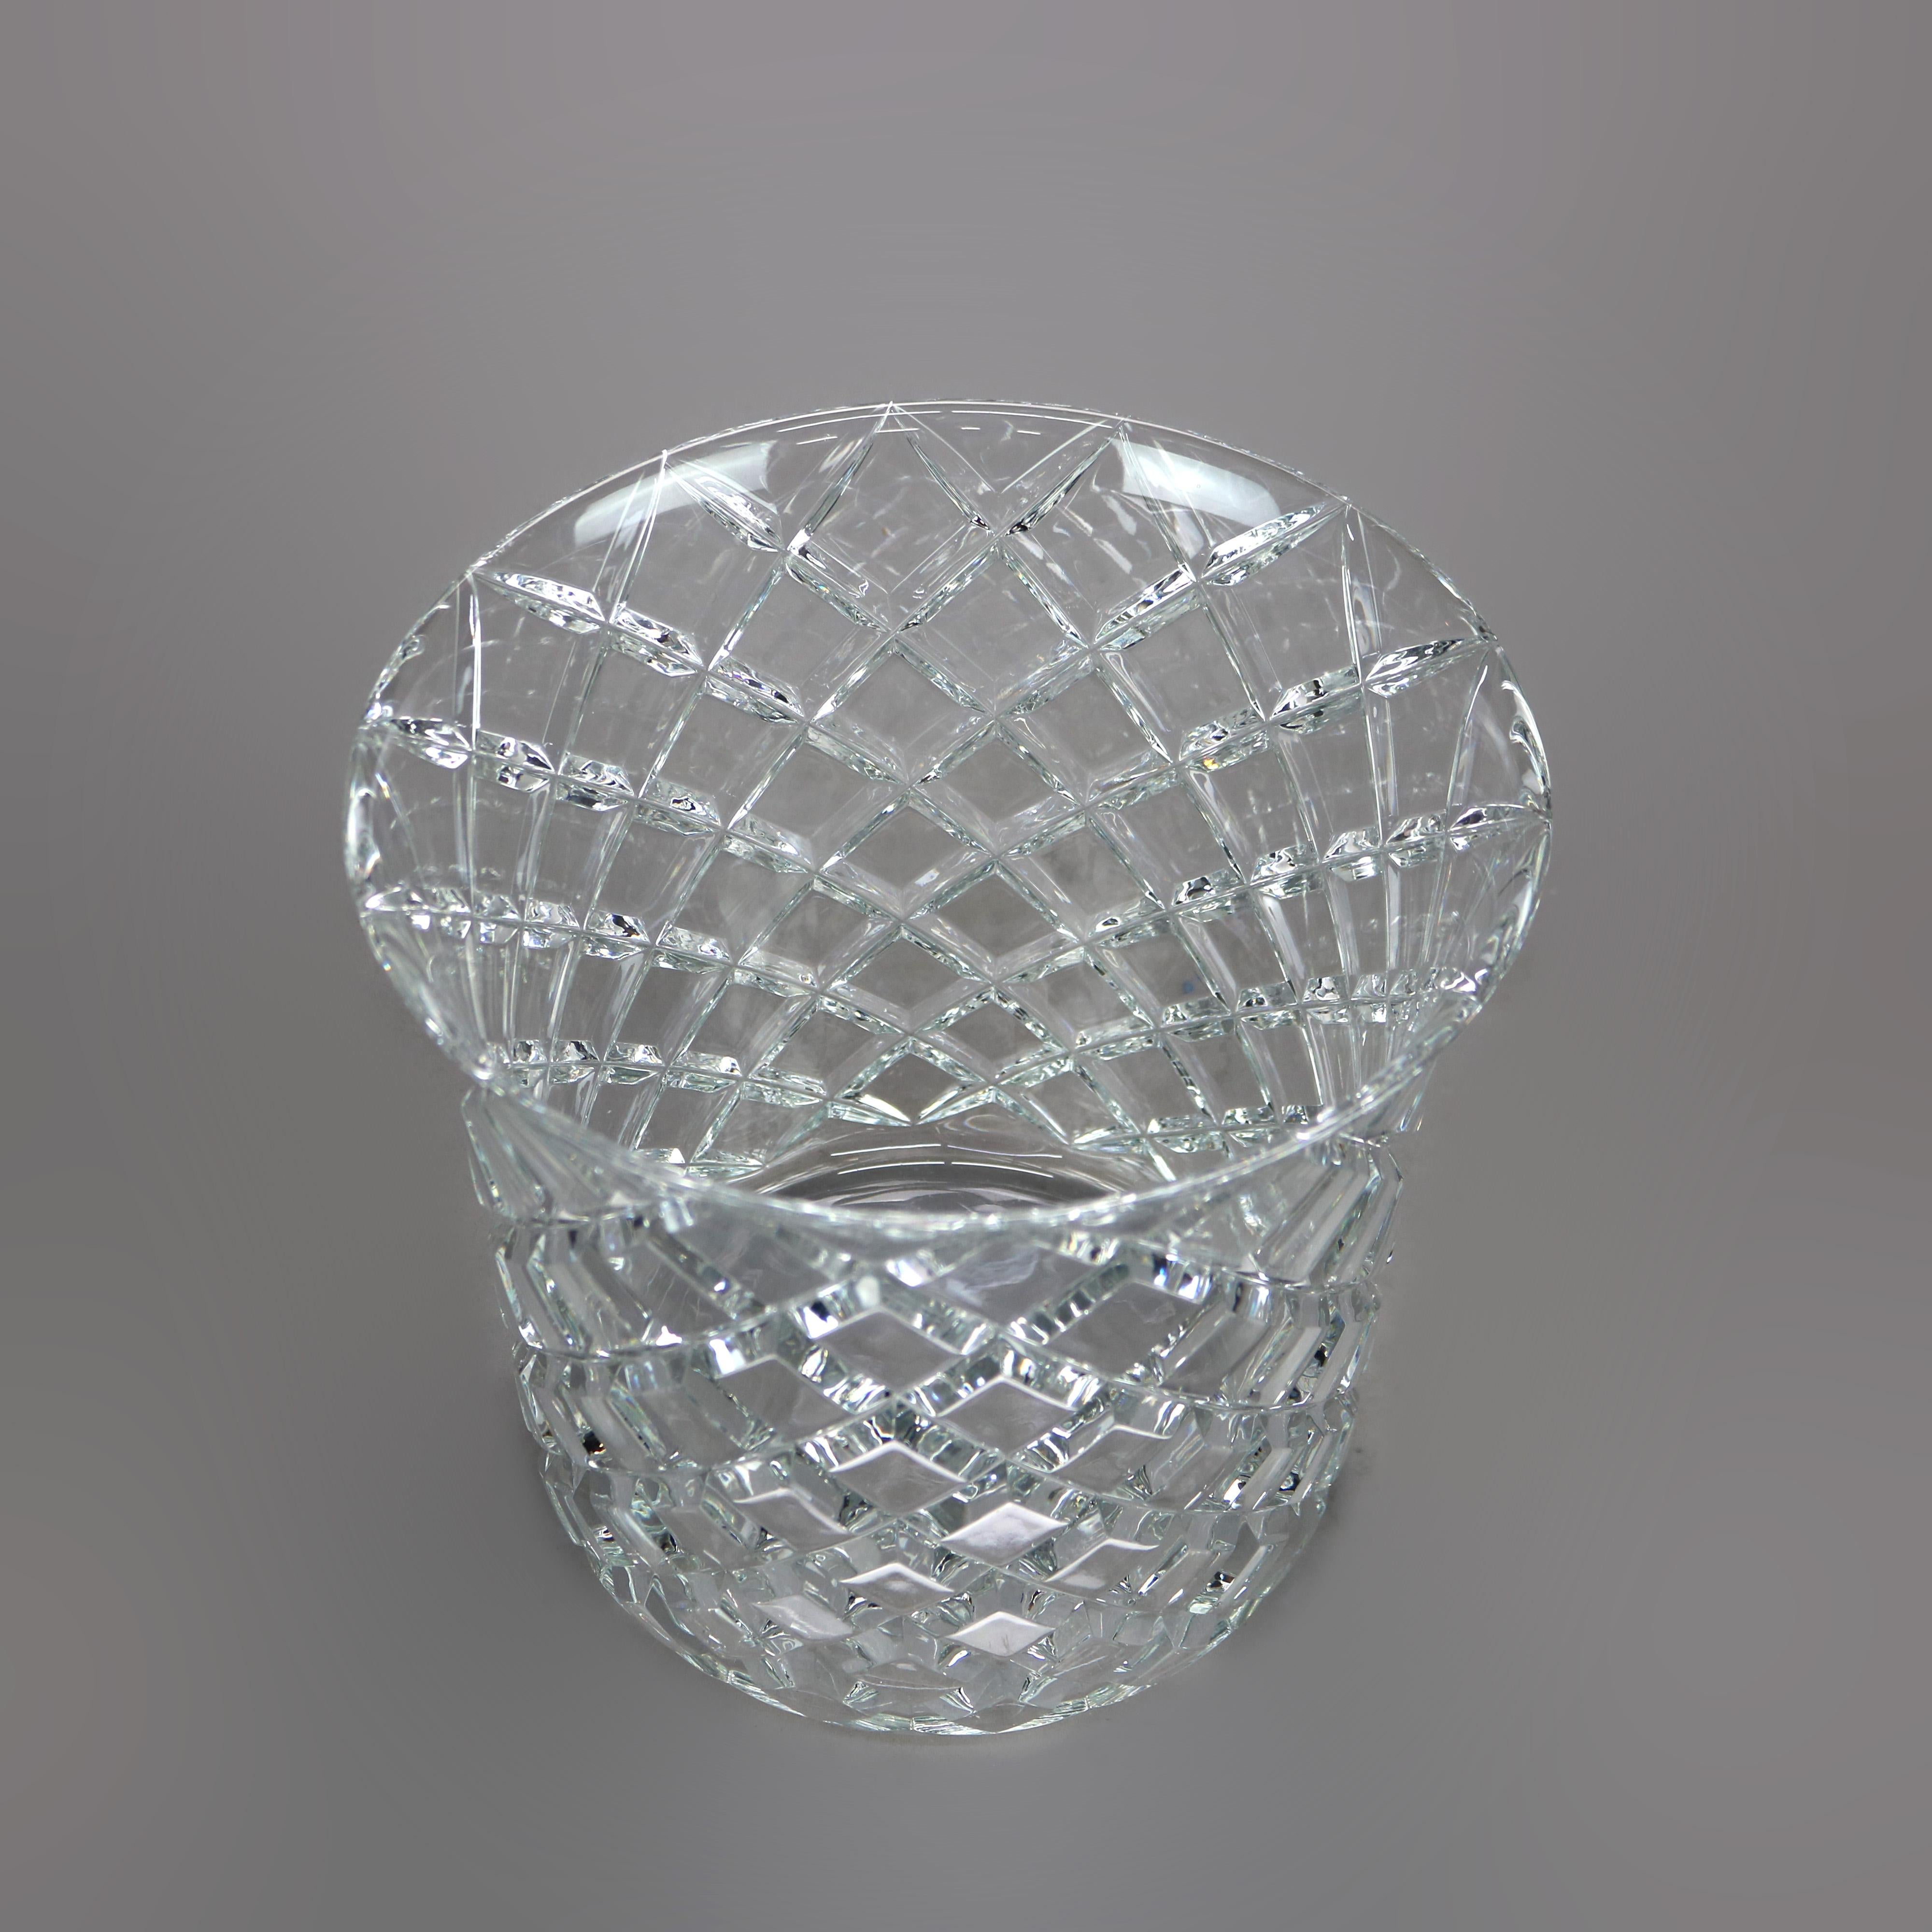 American Lead Crystal Champagne Bucket After Tiffany & Co. 20th C